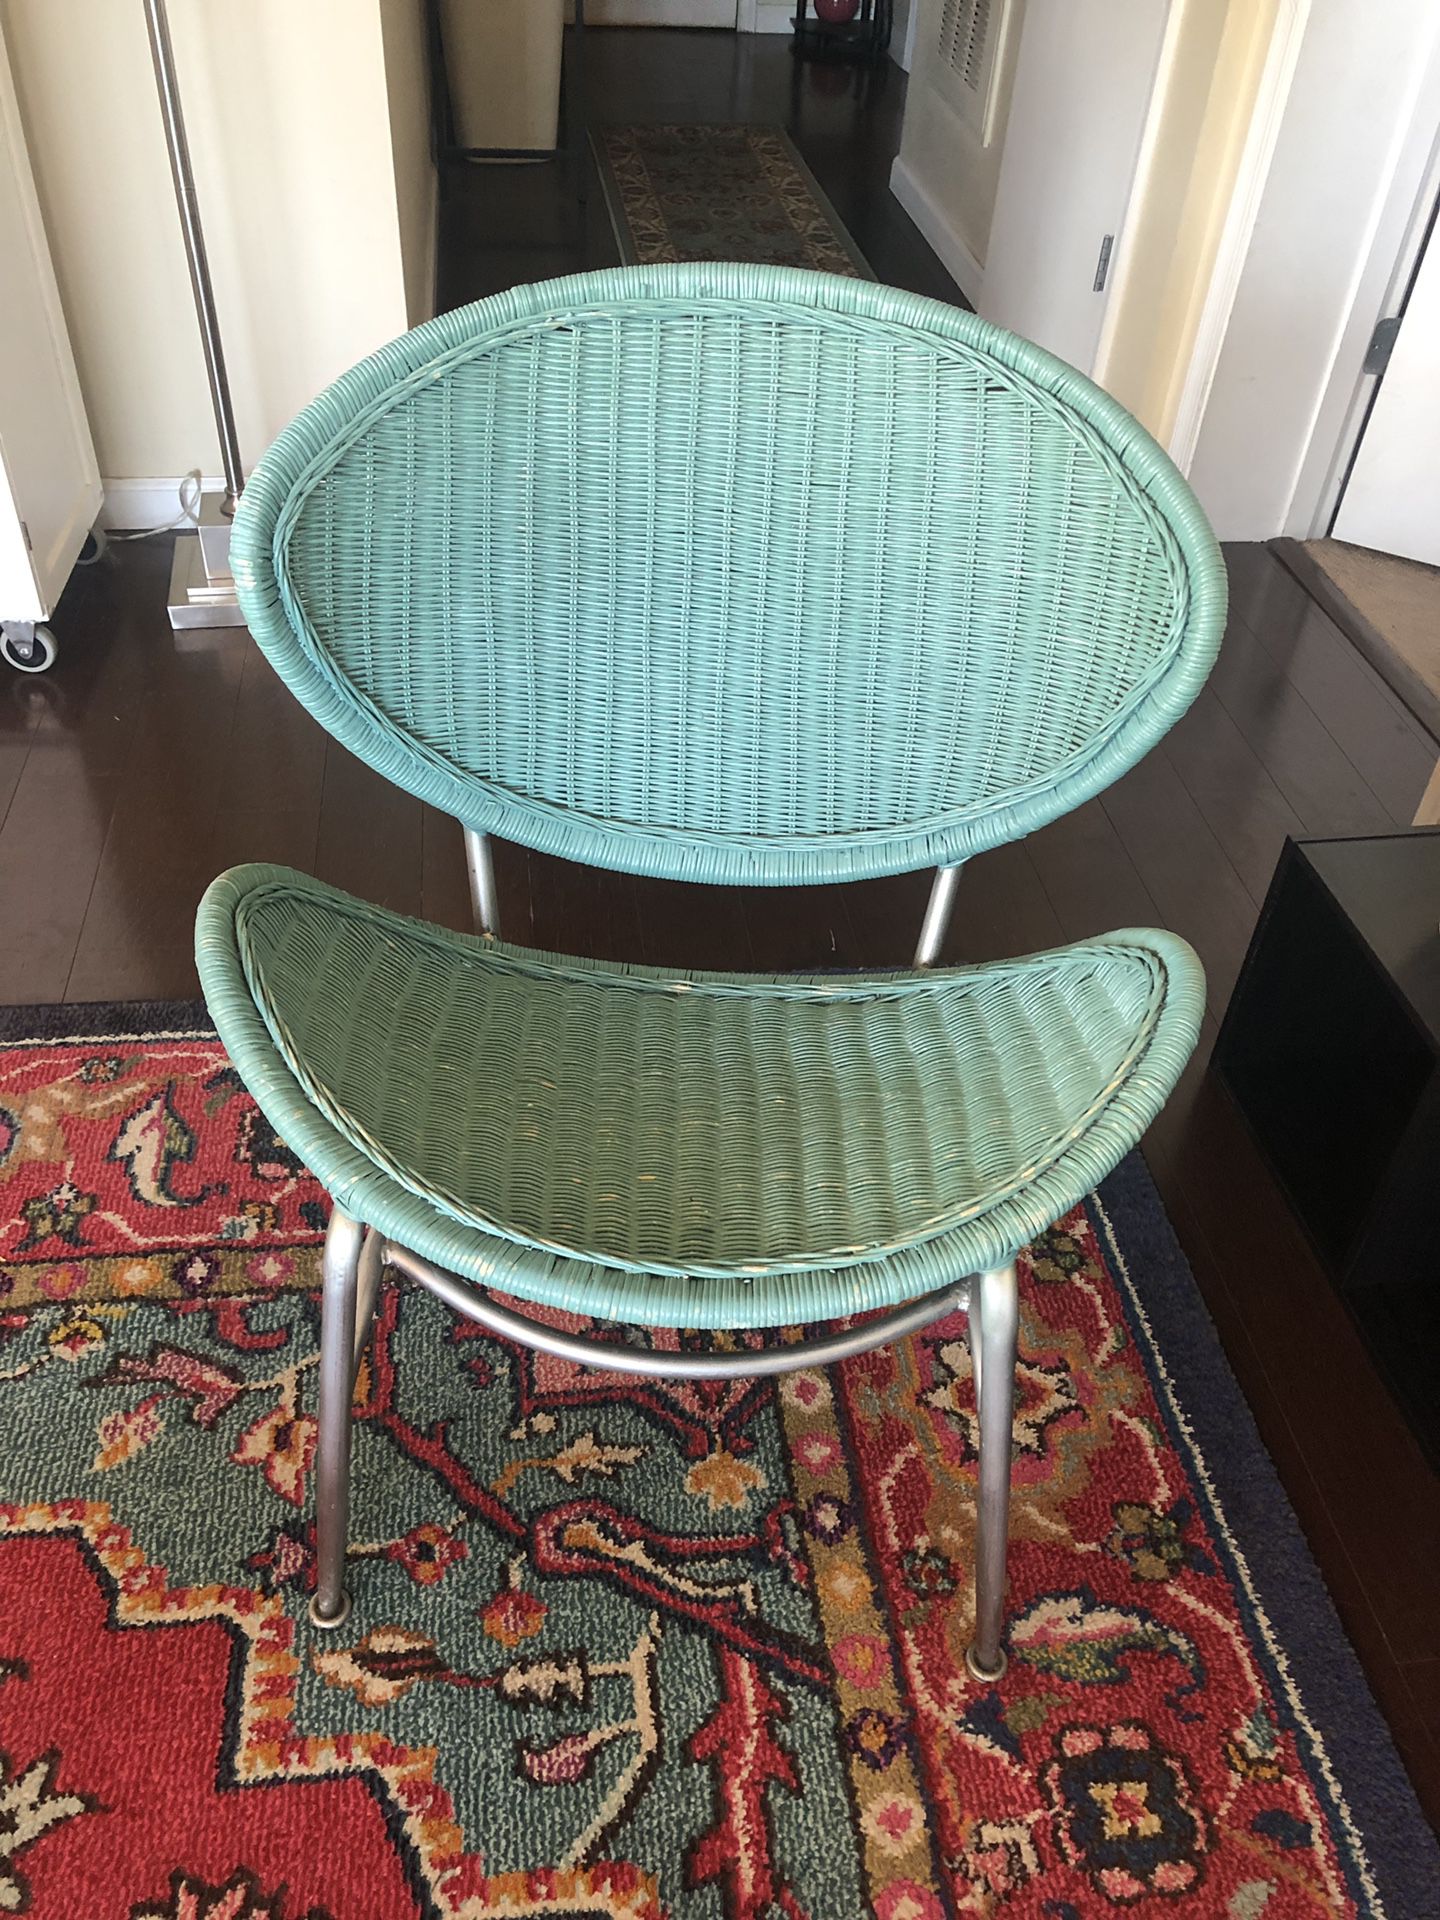 Pier 1 Turquoise Wicker Chair